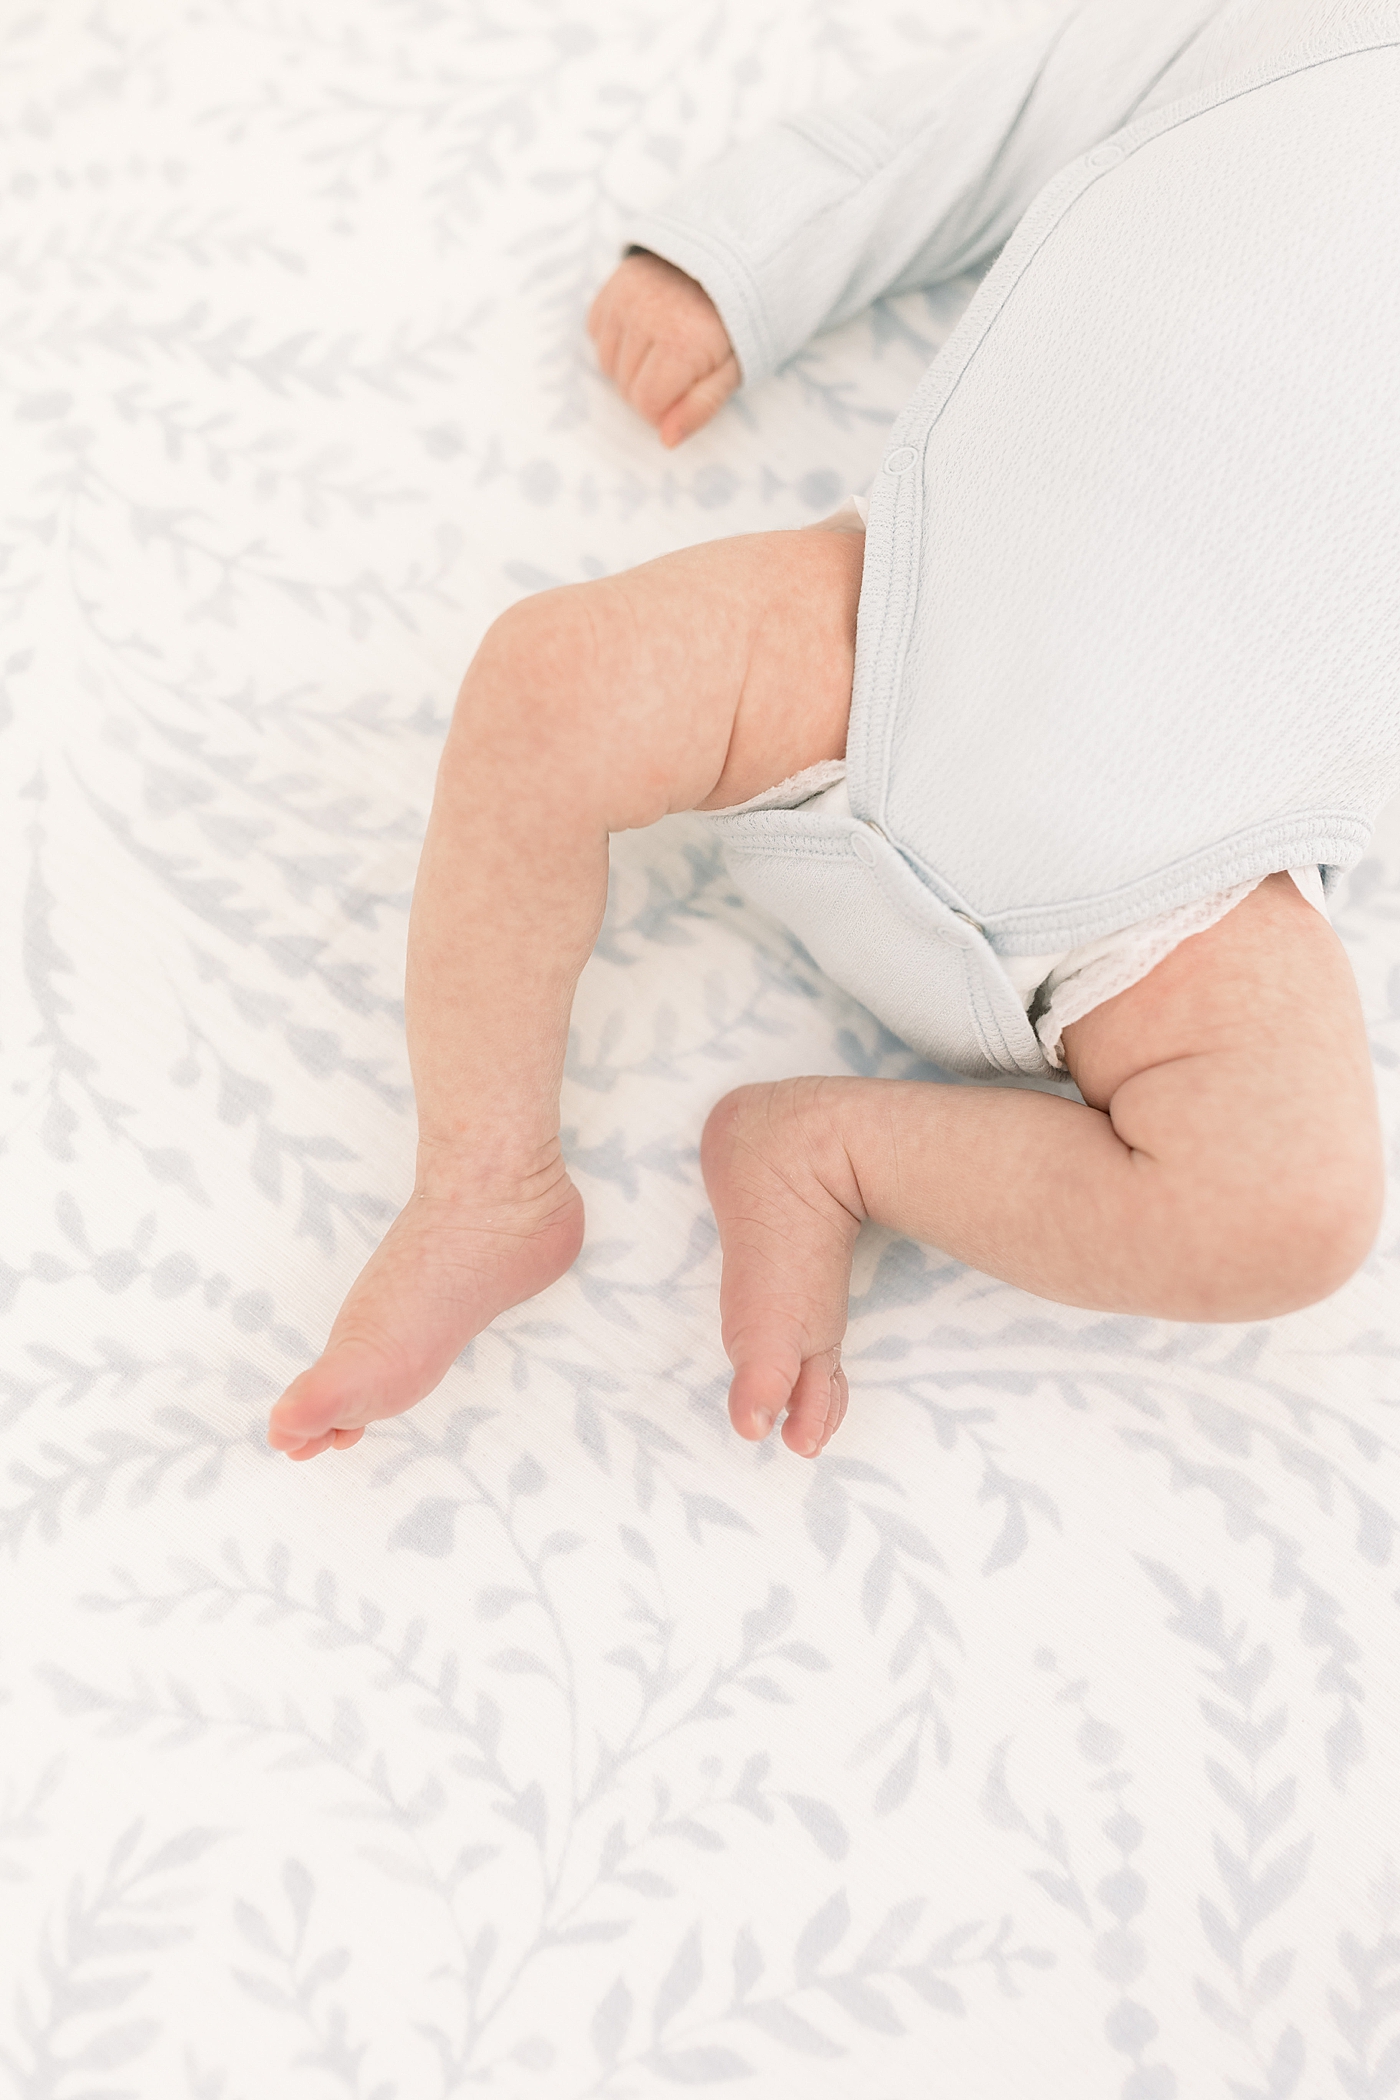 during baby boy bewborn session| Image by Caitlyn Motycka Photography